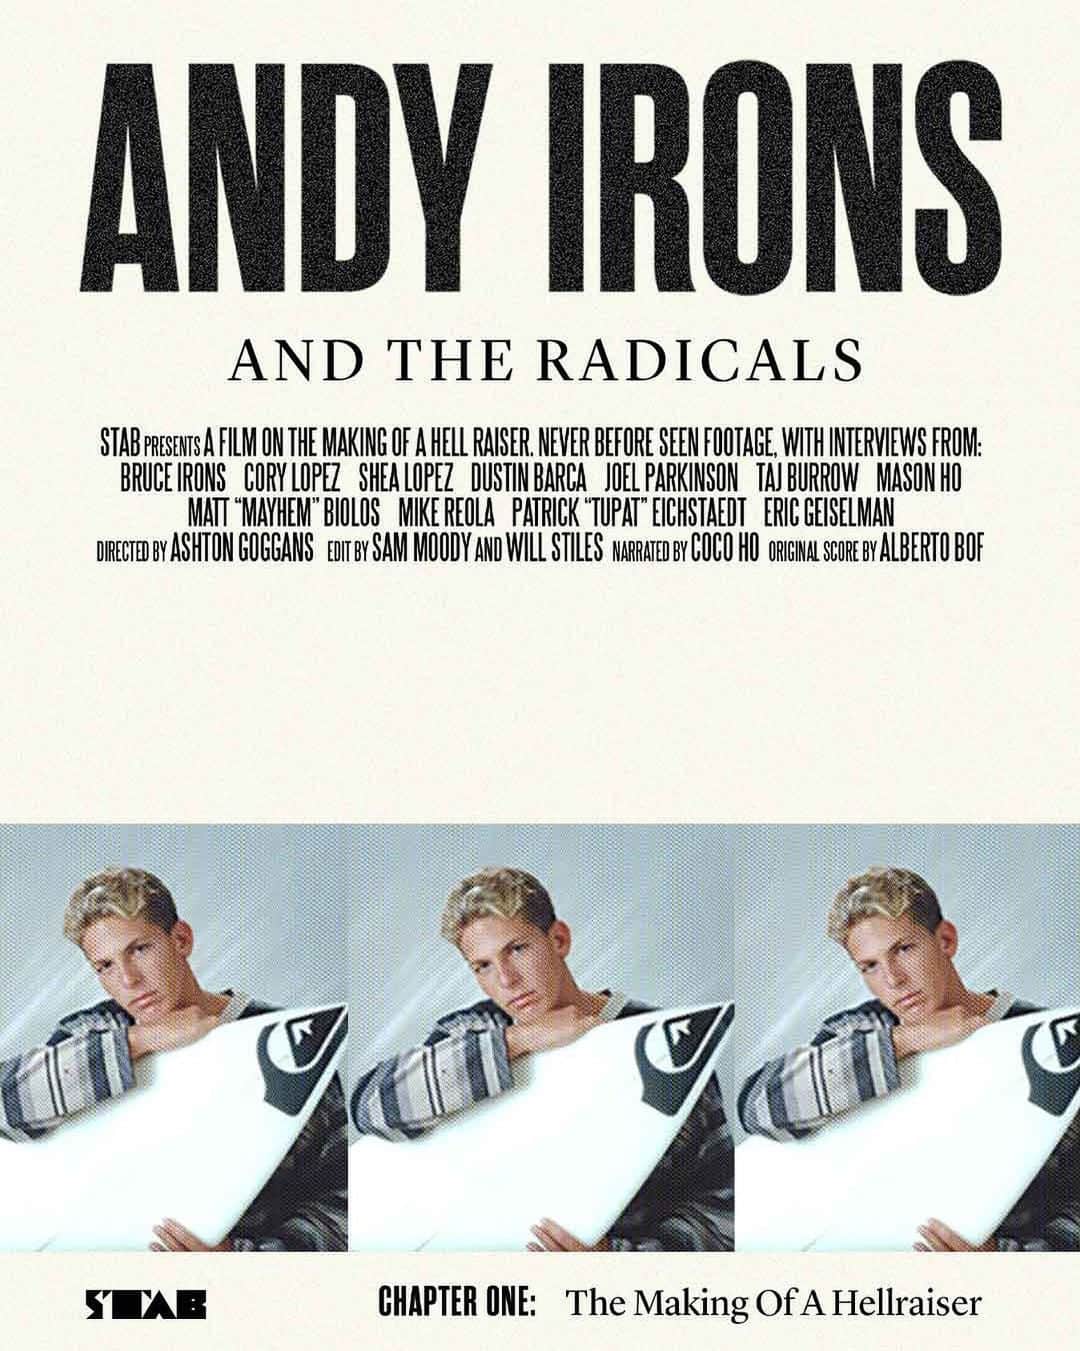 Surf Magazineのインスタグラム：「You ever just, I don’t know, stumble across an old box full of unseen Andy Irons tapes?   Andy Irons and the Radicals Chapter 1 is now playing on Stab Premium. (Thanks to everyone who contributed footage to make this happen, especially @therealtupat, @hopperdoggy, @mikereola, @dibi_fletcher, @milllhouse, @_ryan_thomas, @taylorsteele @drewtodd_, @hatcholhoff, @jacobvanderwork, @woodrowmedia, @samzubevich, @notnotdannyjohnson, @christianoehmke, @miniblanchard, @jrkenworthy, @brianbielmann, @mayhemsurfboards_mattbiolos, @caseycolli many more).」